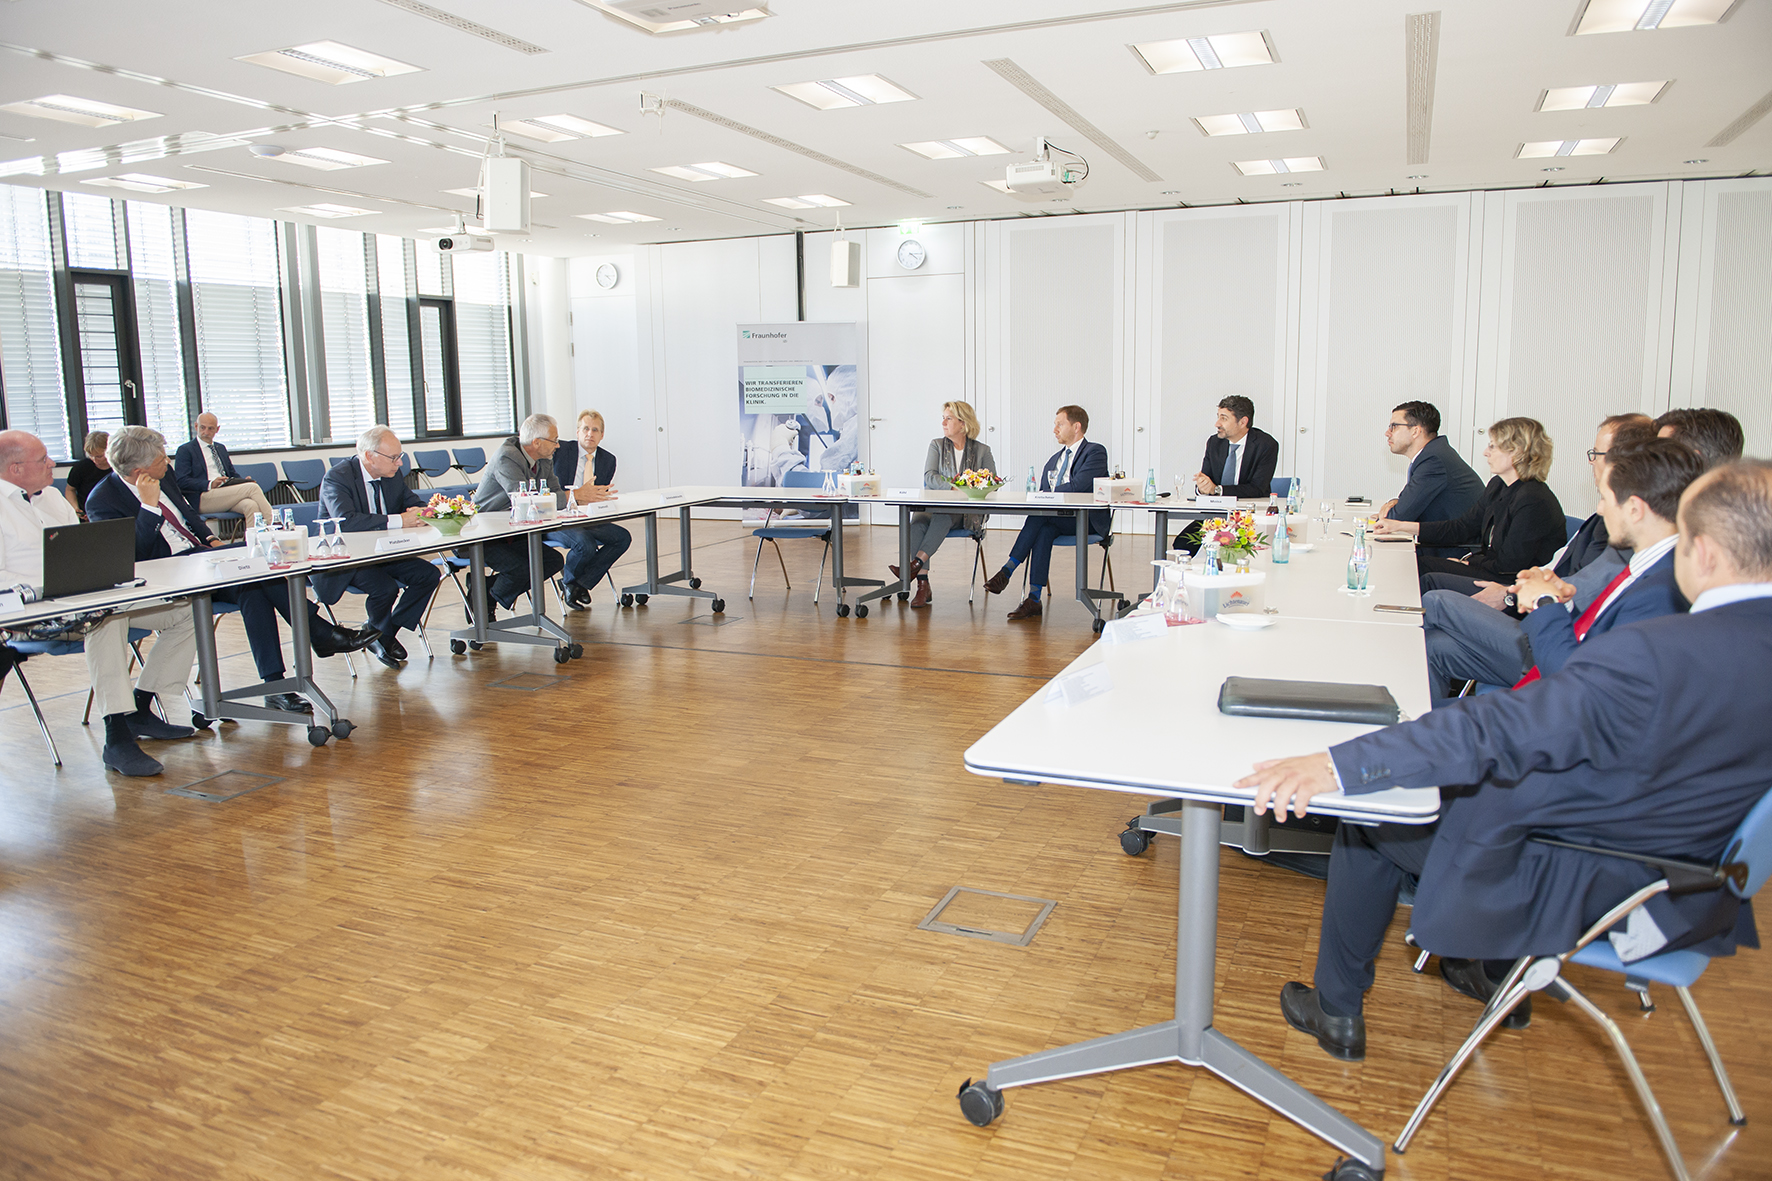 The Saxon Prime Minister Michael Kretschmer discussed with representatives of Novartis Oncology Germany and Fraunhofer IZI challenges and opportunities for the Saxon site in the development of novel cancer immunotherapies.